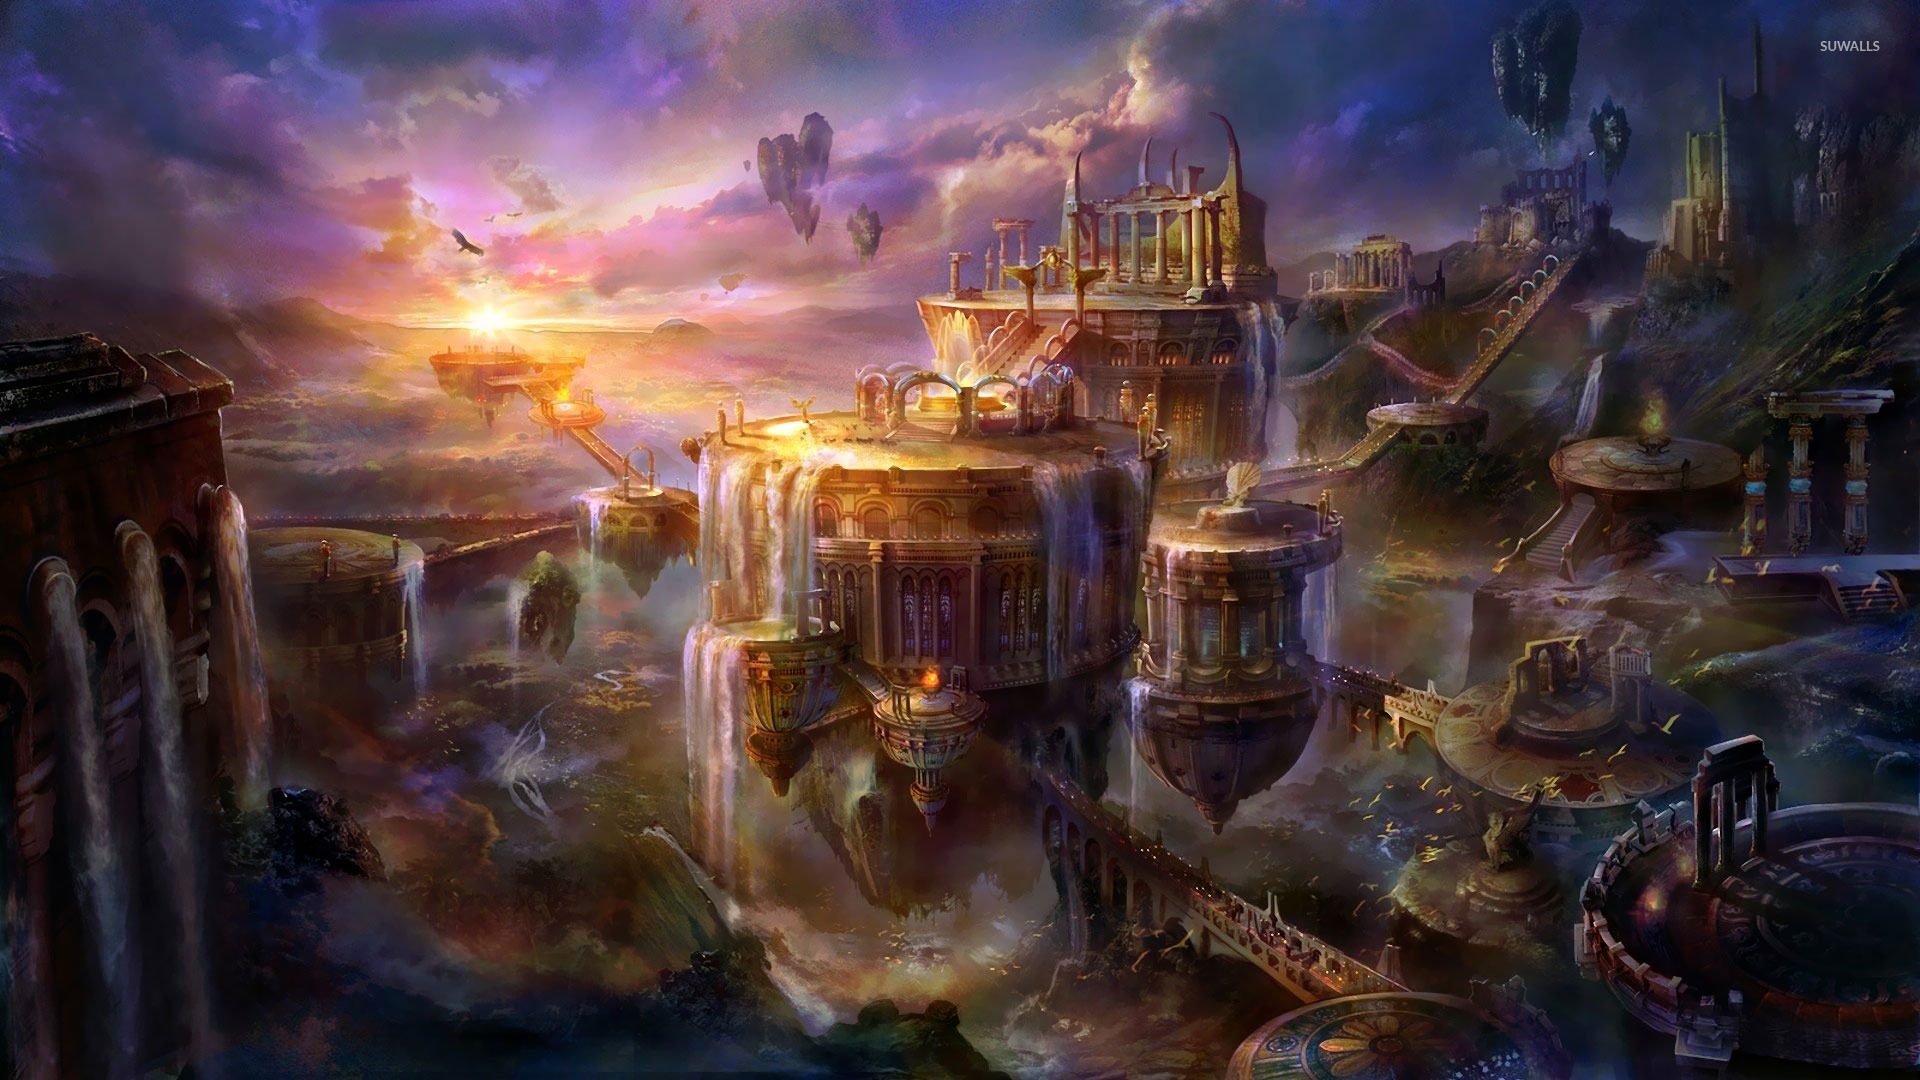 Floating city [2] wallpaper   Fantasy wallpapers   18522 1920x1080